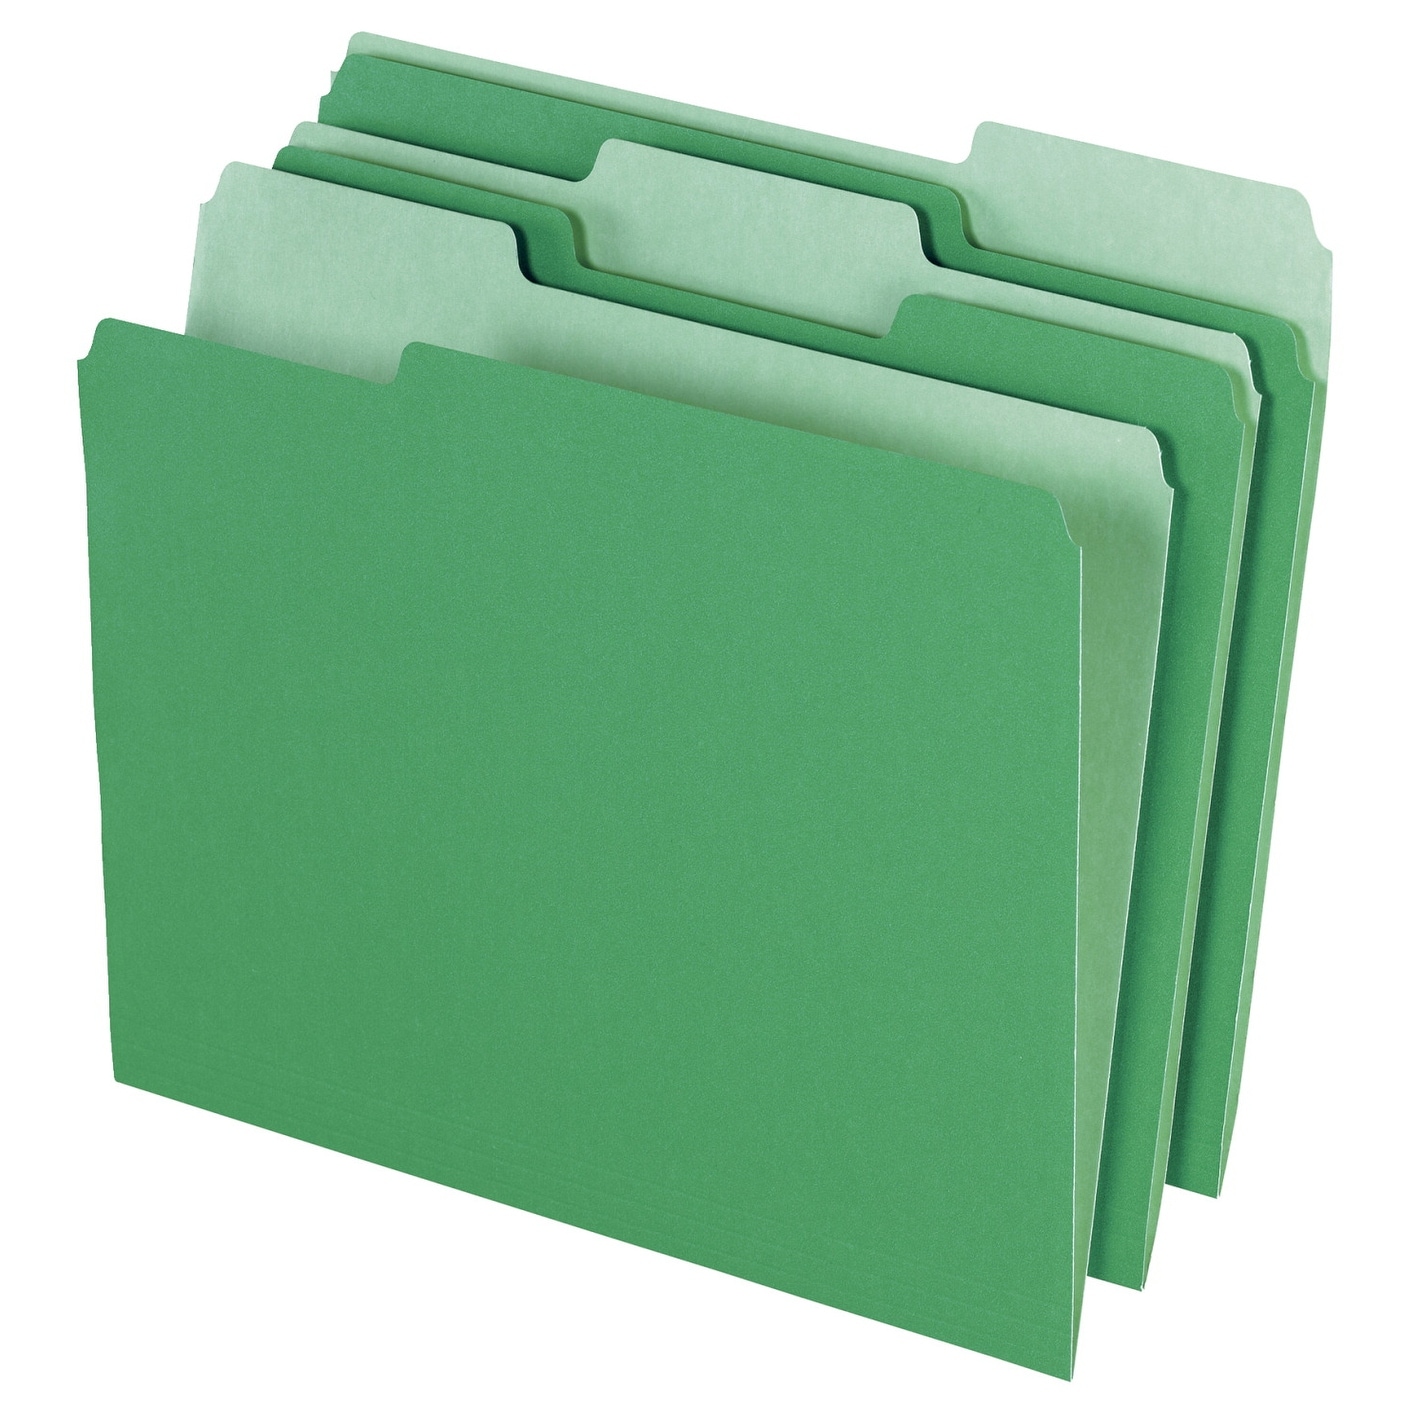 Pendaflex 1/3 Top Tab File Folders Two Tone Assorted Colors Letter 100 Count